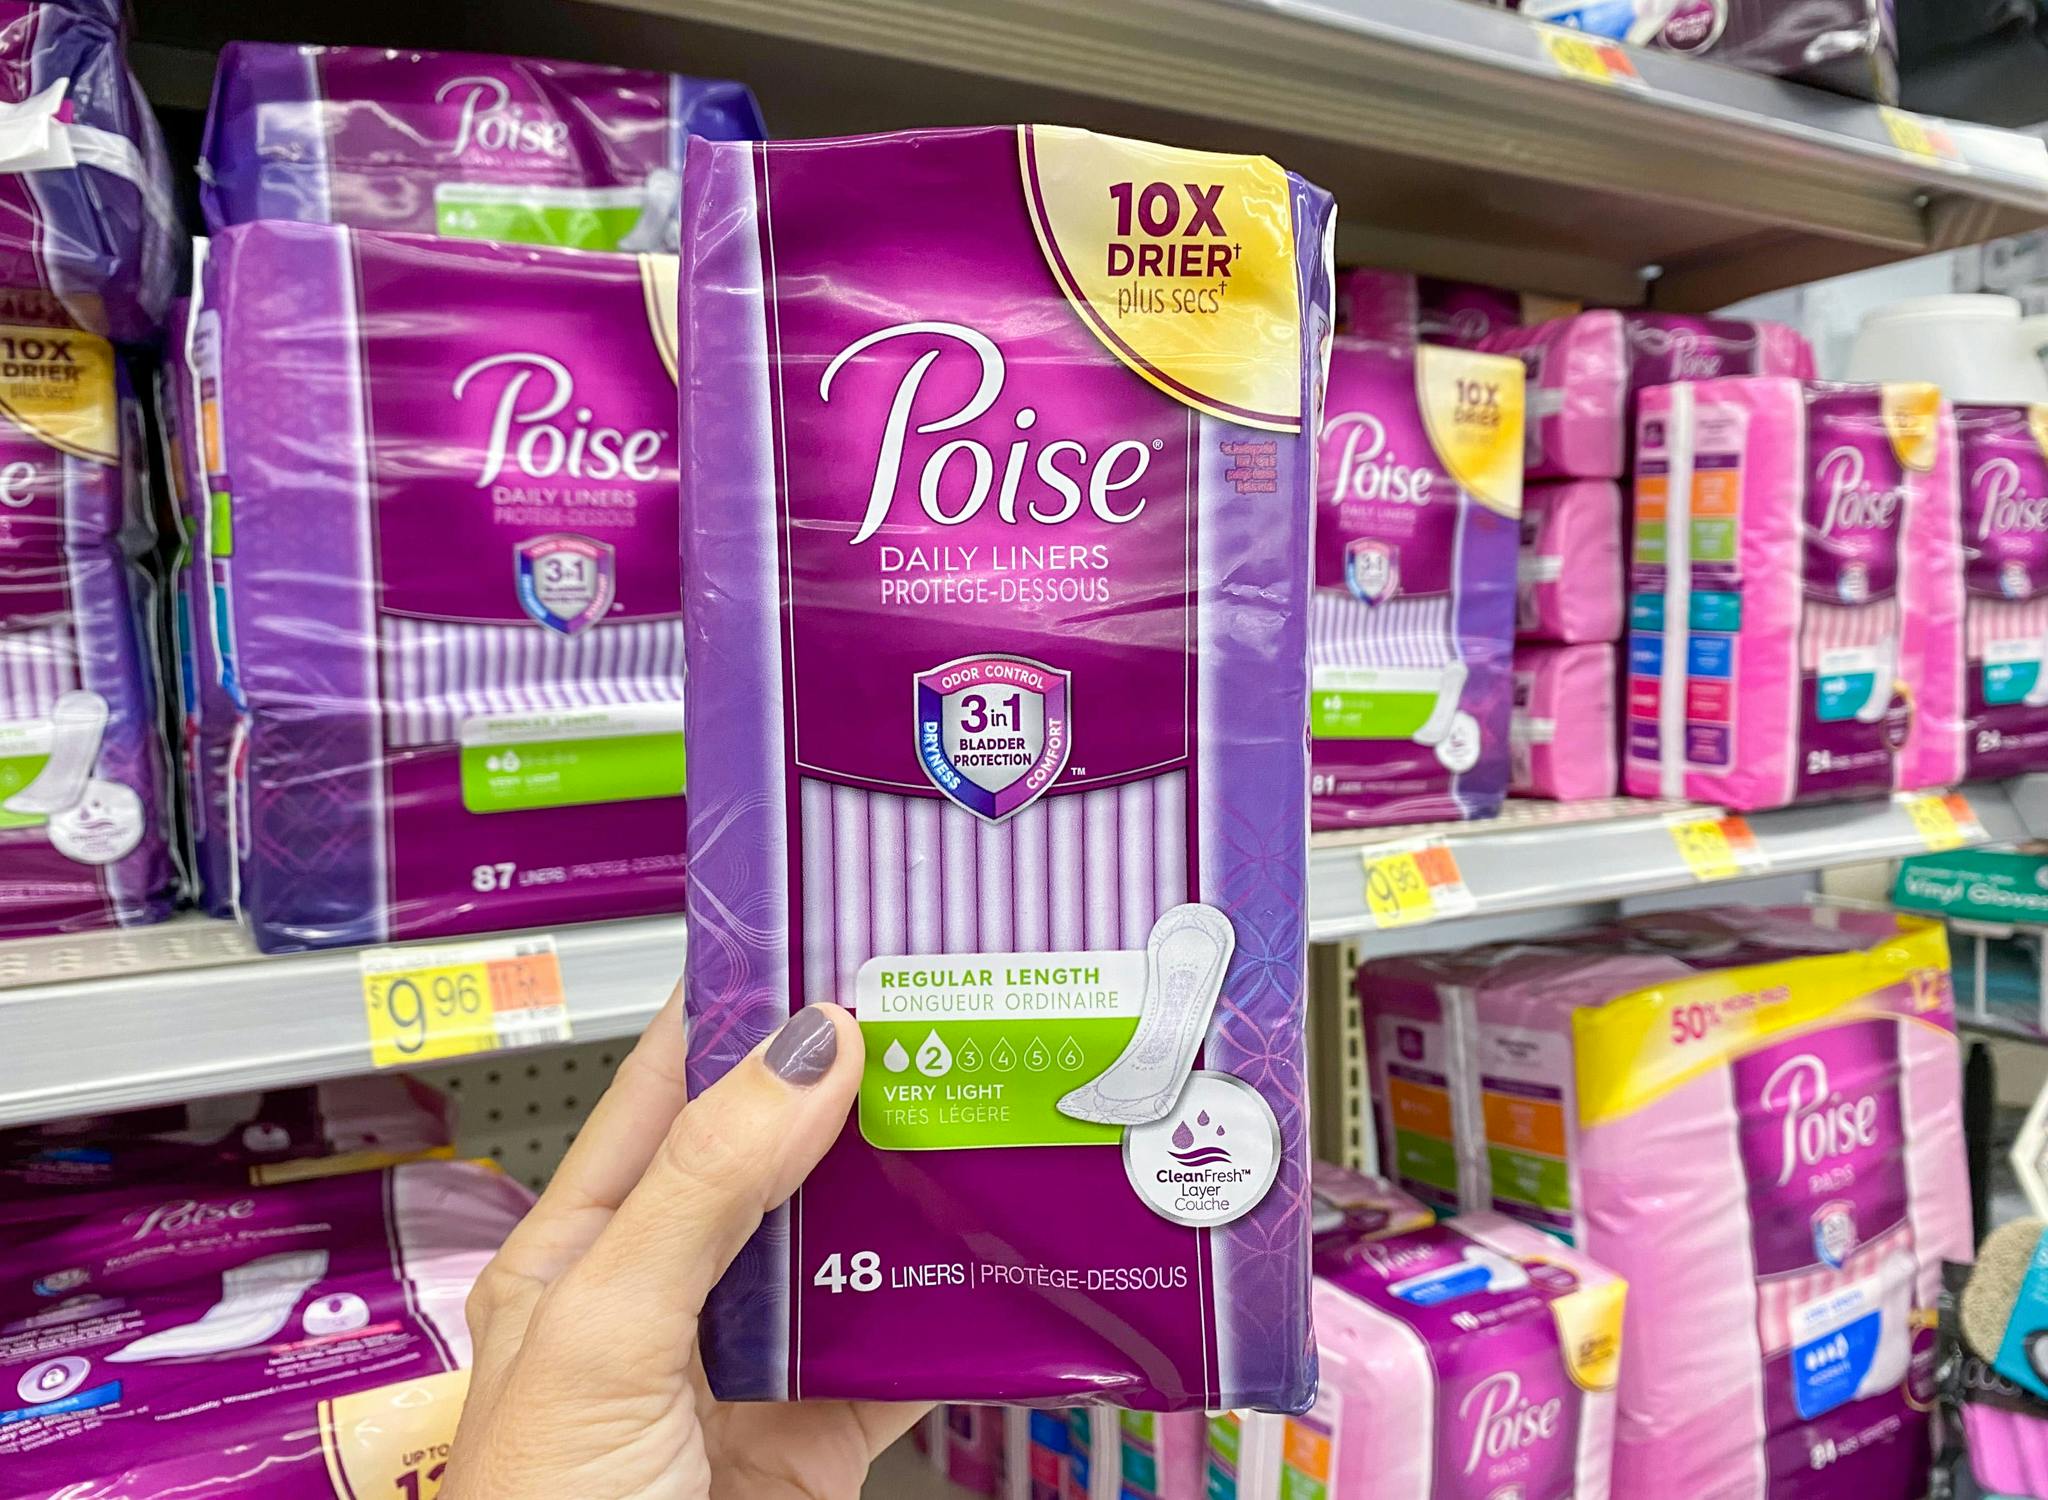 Holding up a pack of Poisedaily liners in front of a shelf stacked with other Poise products at Walmart